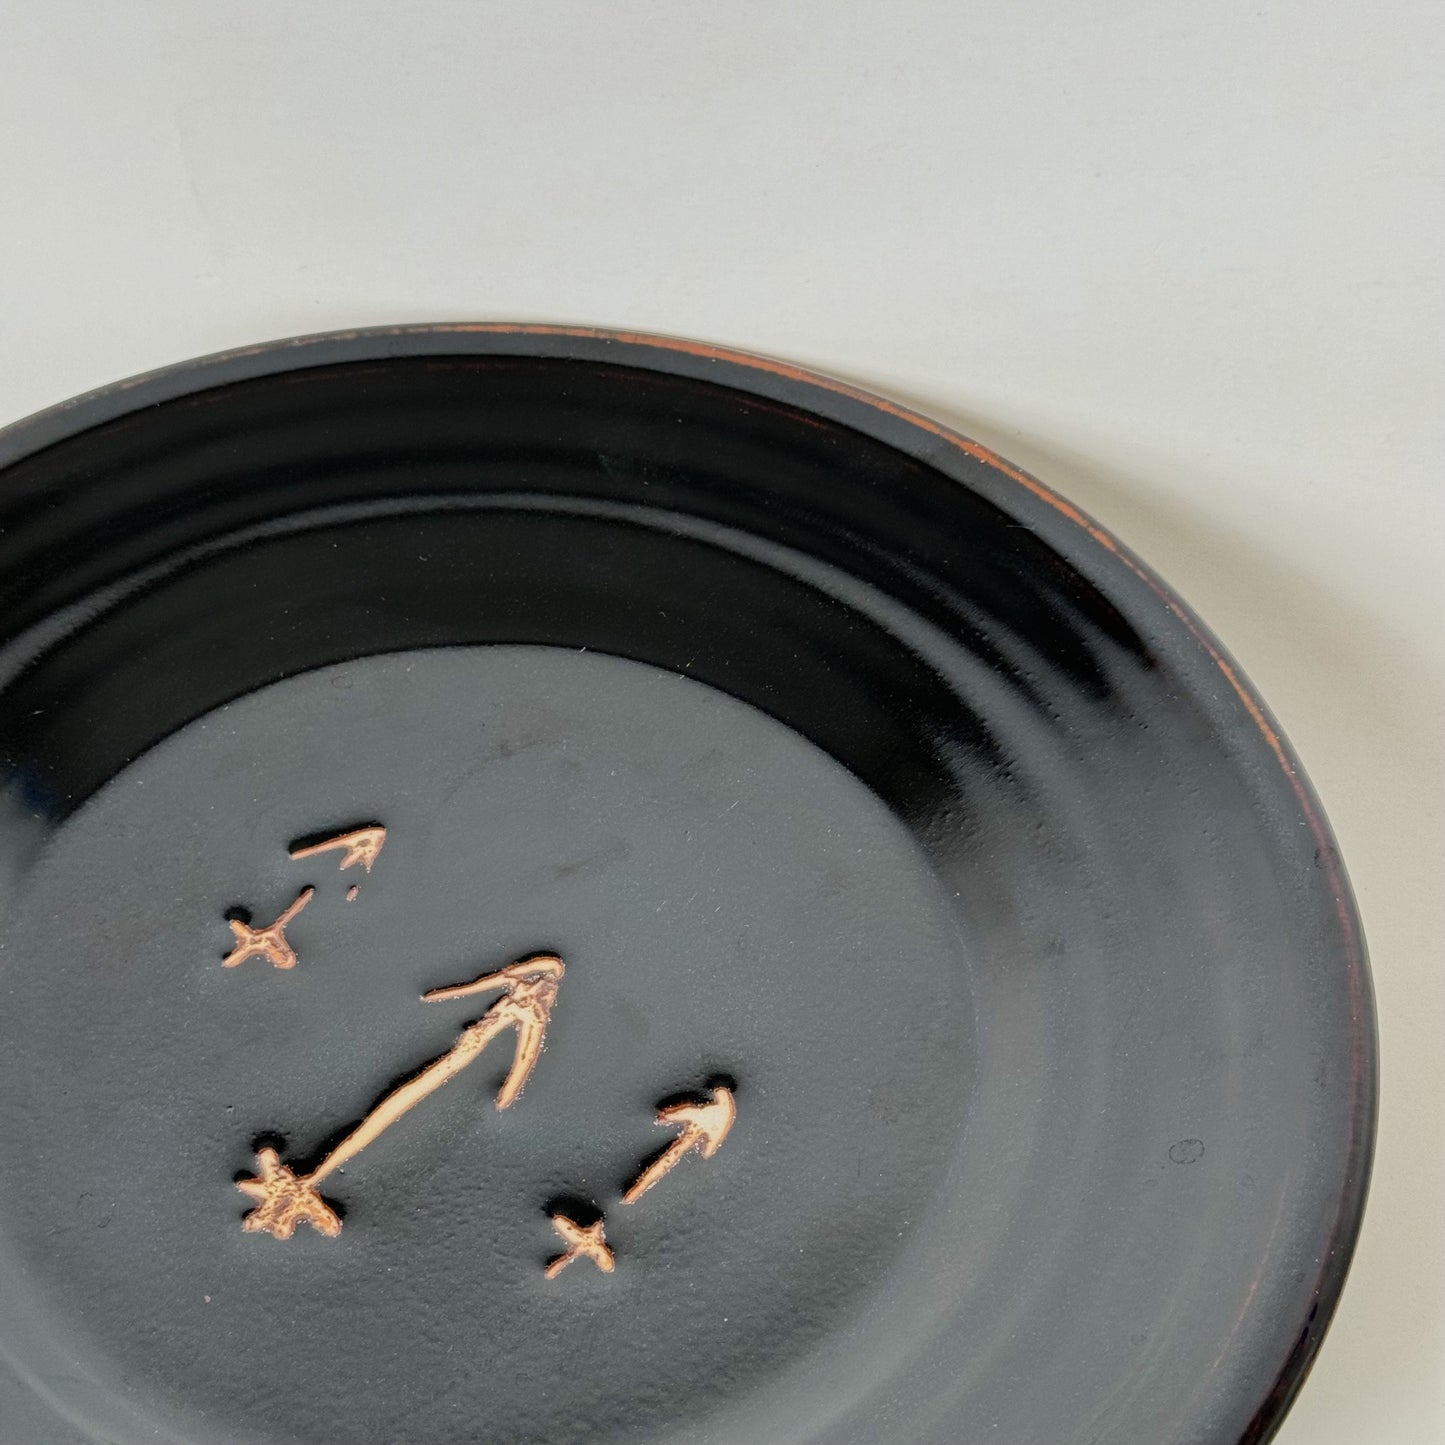 Black Plate with Arrows | Panther Pots Ayden Krzmarzick